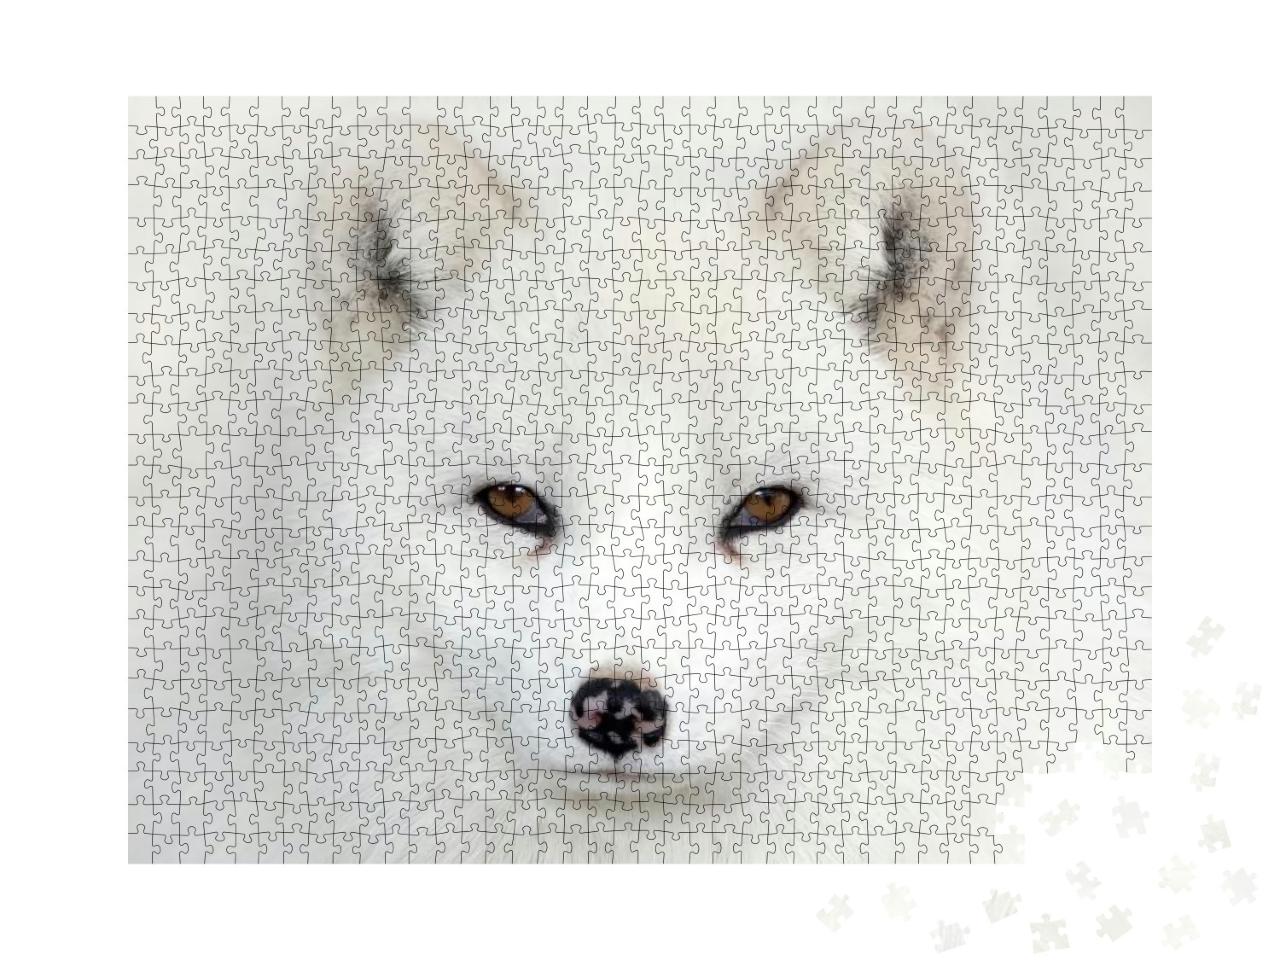 Arctic Fox Vulpes Lagopus Portrait Isolated on White Back... Jigsaw Puzzle with 1000 pieces